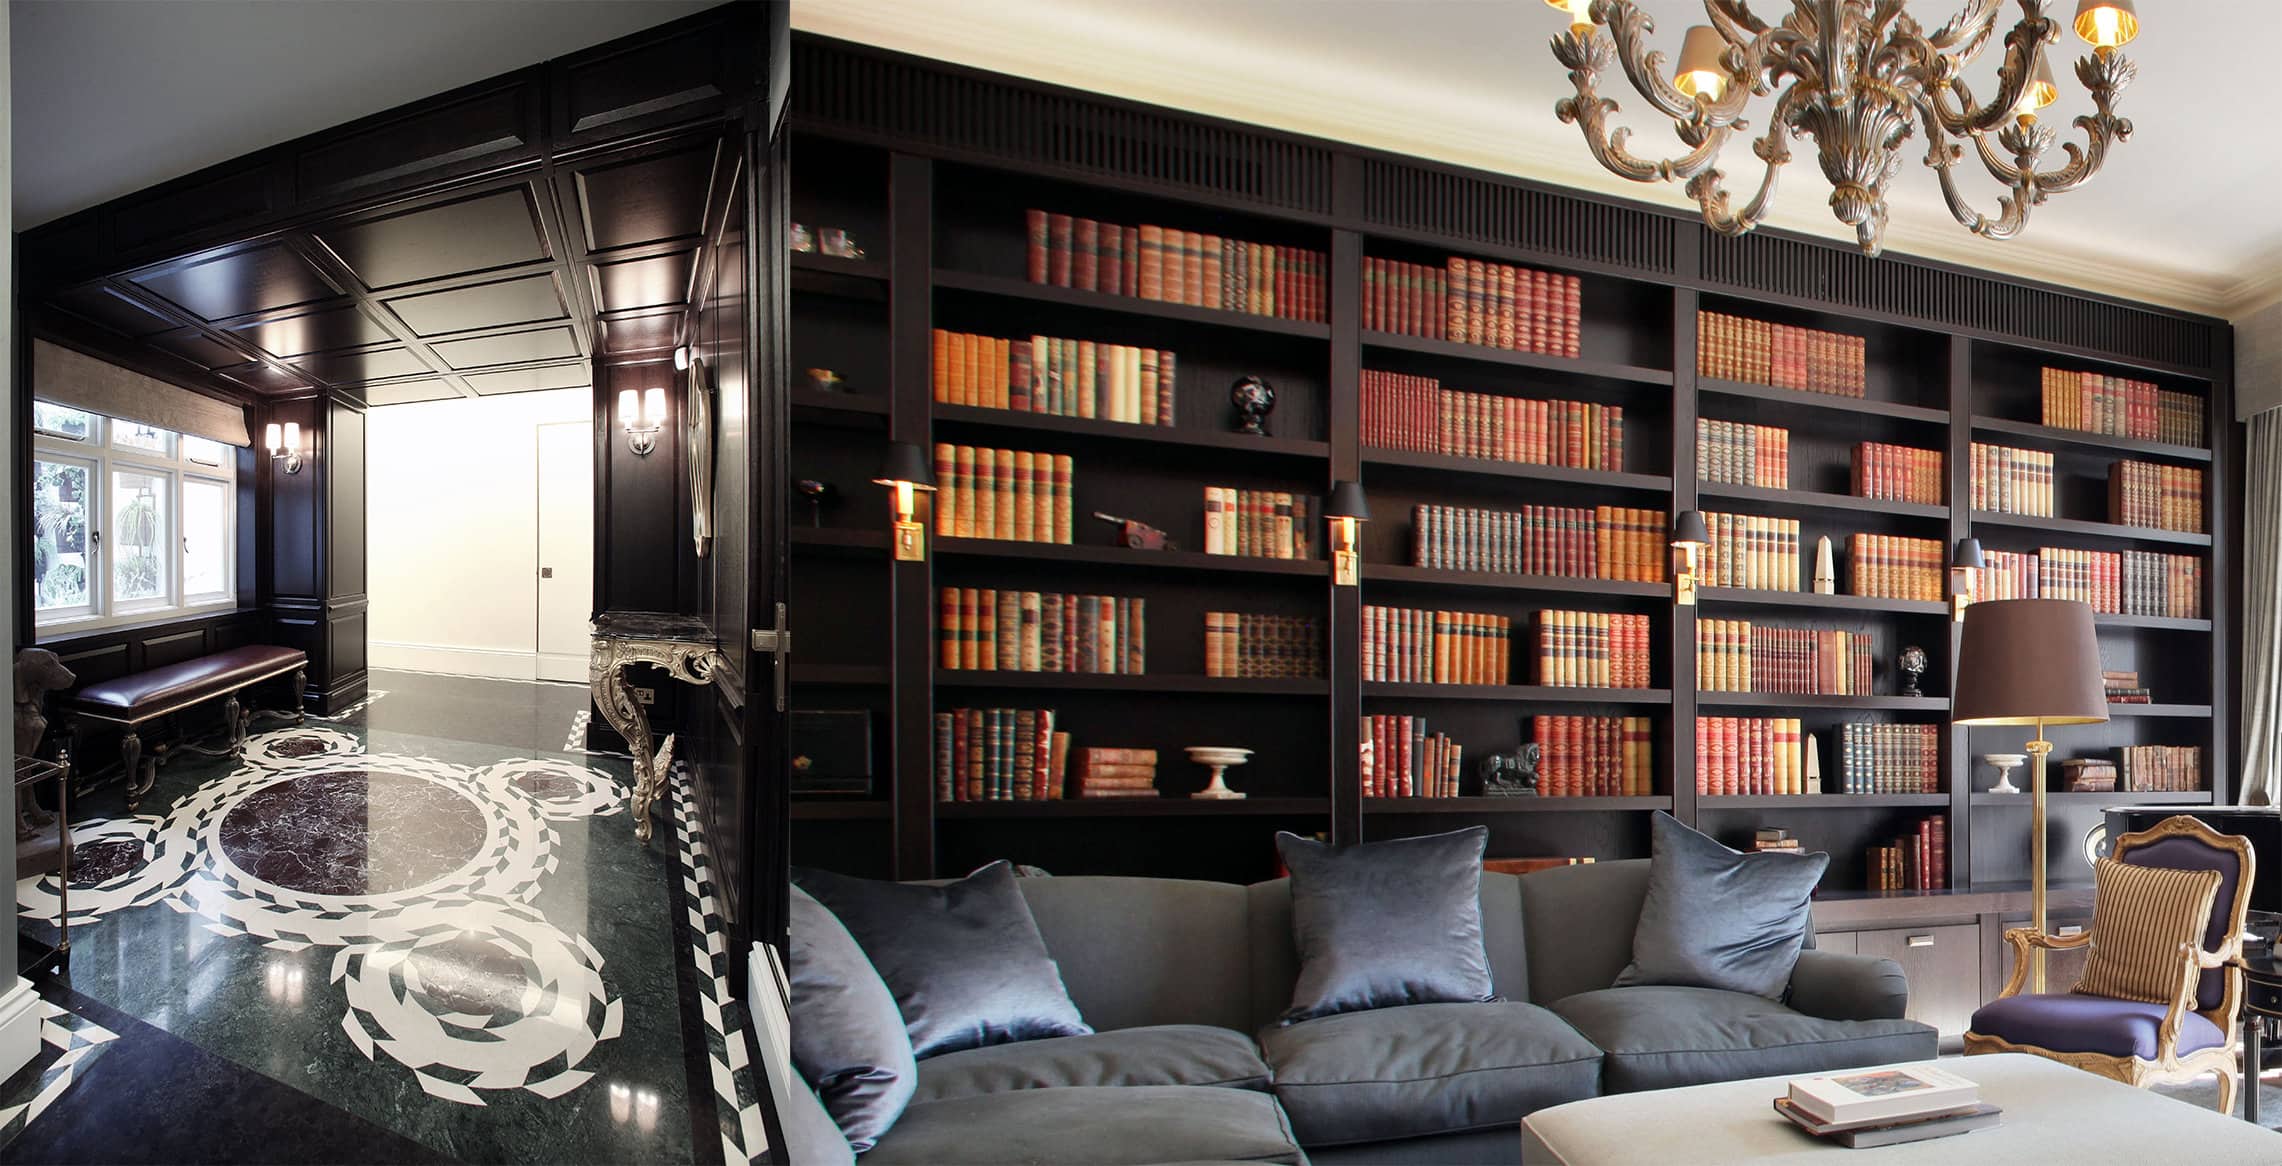 Luxury library room with elegant sofa sitting interior design in the house